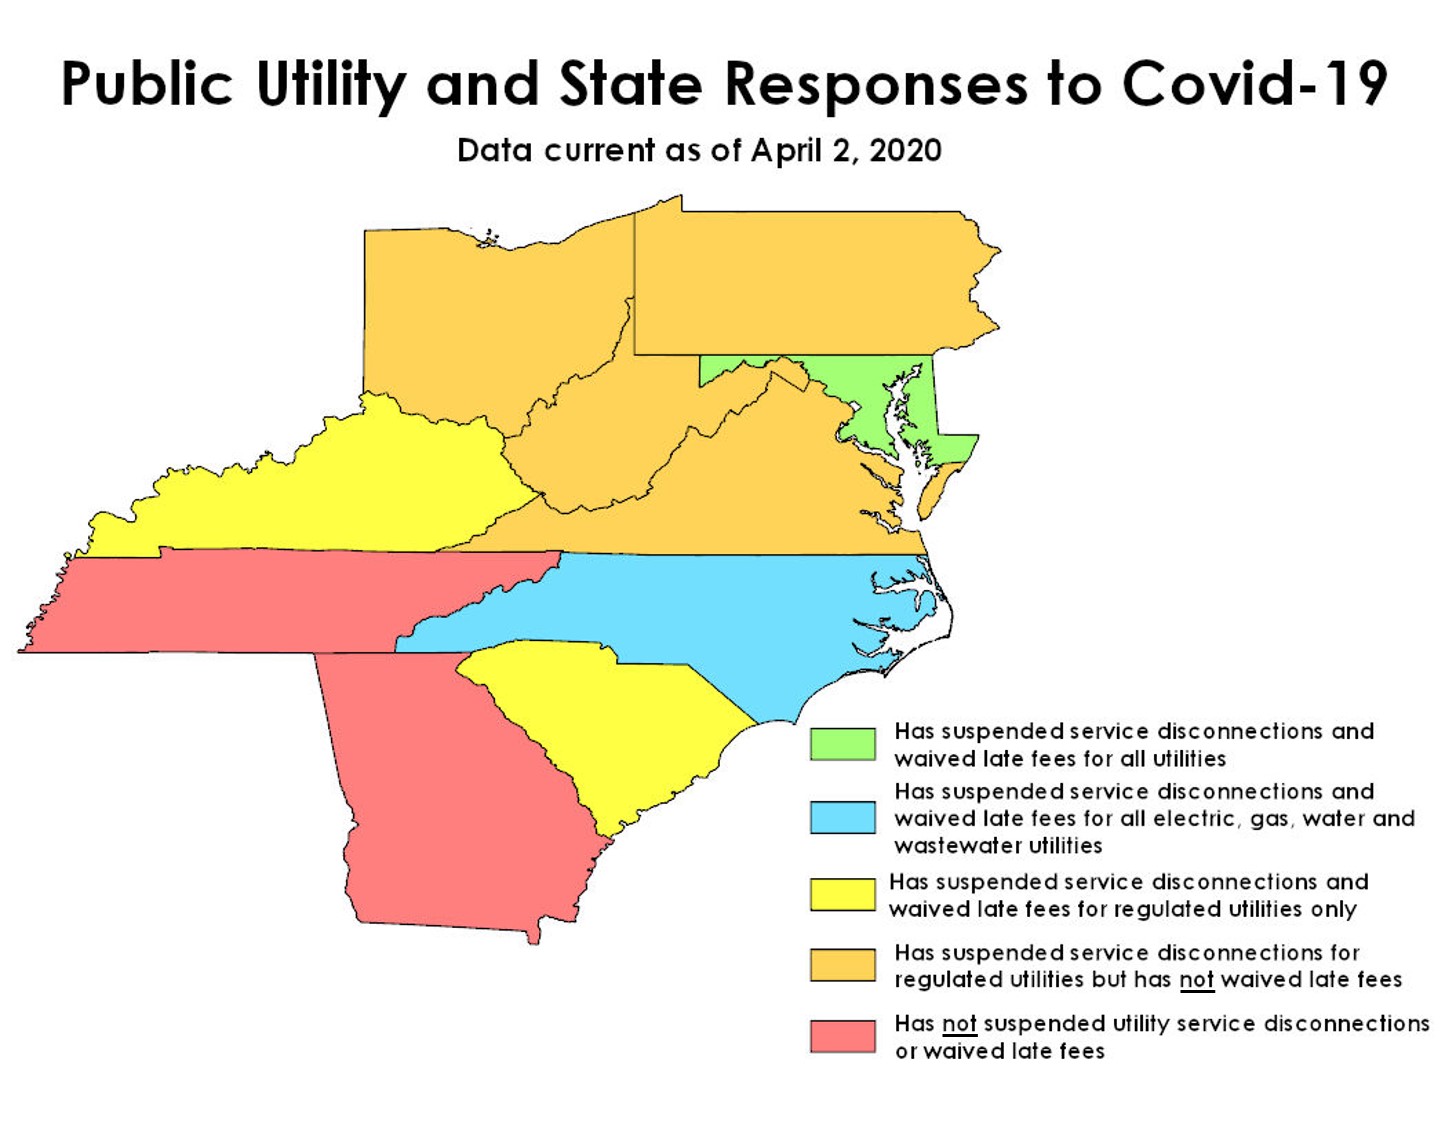 public utility and state responses to Covid-19